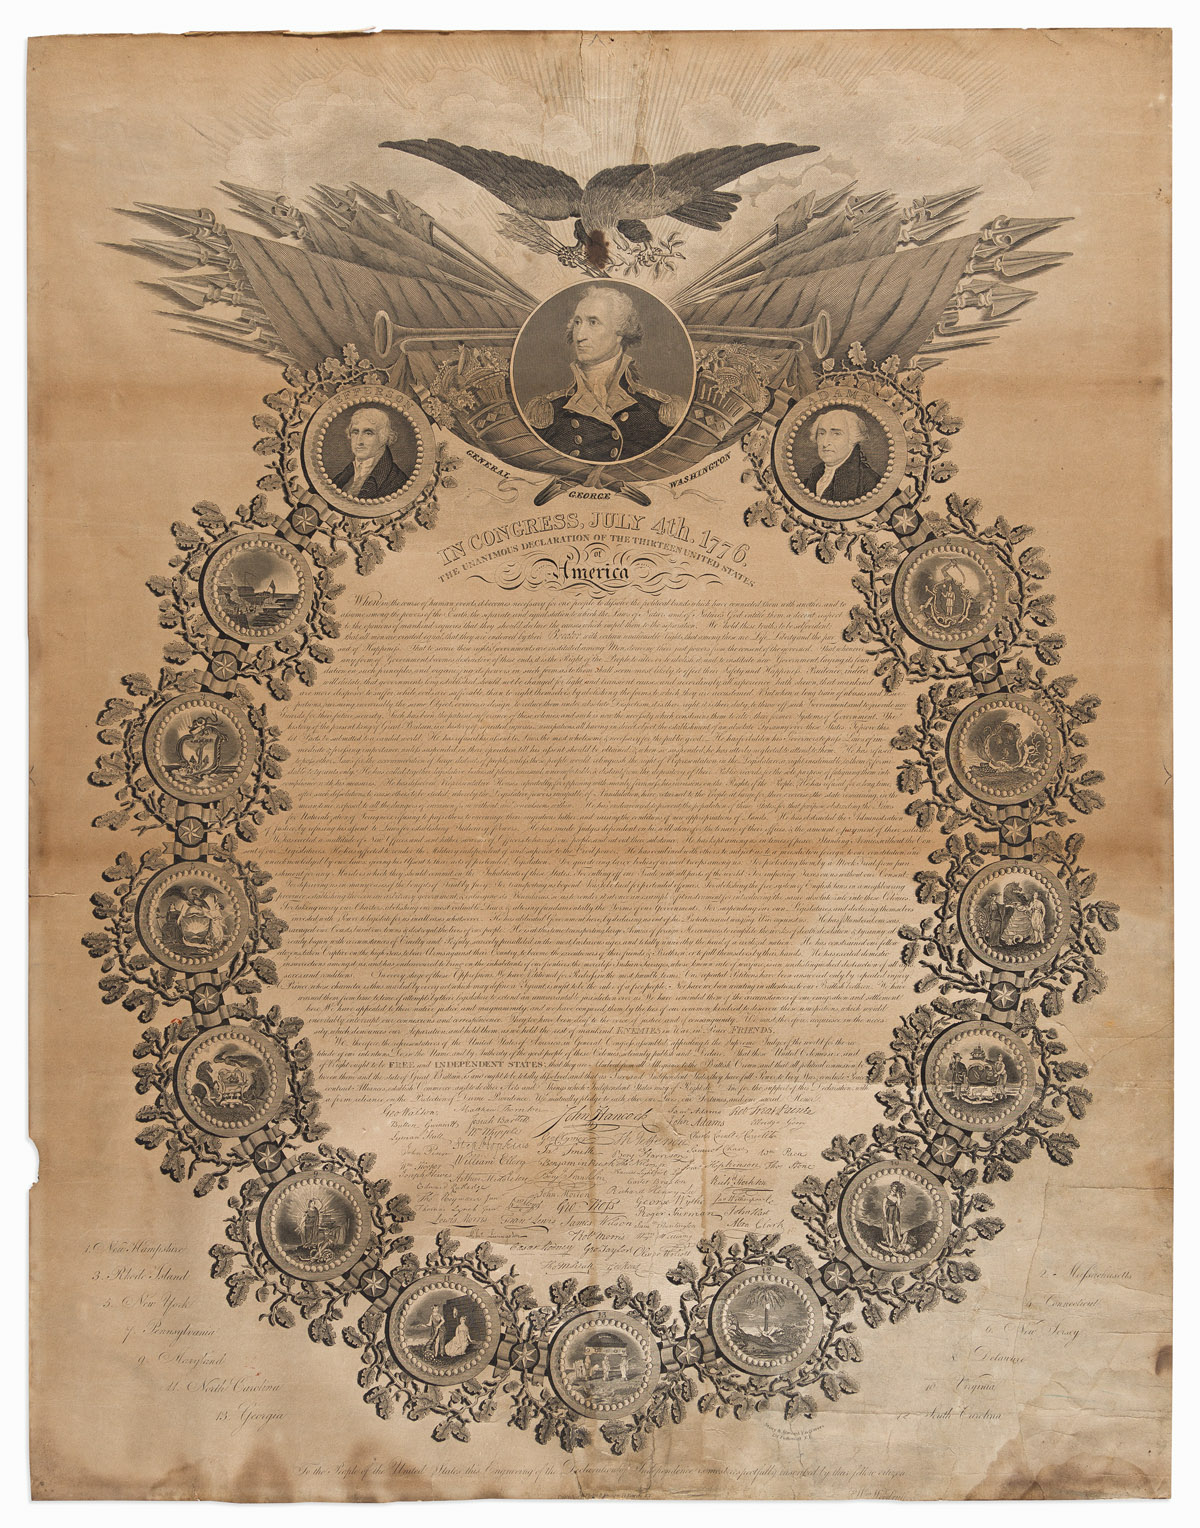 (DECLARATION OF INDEPENDENCE.) In Congress, July 4th 1776.